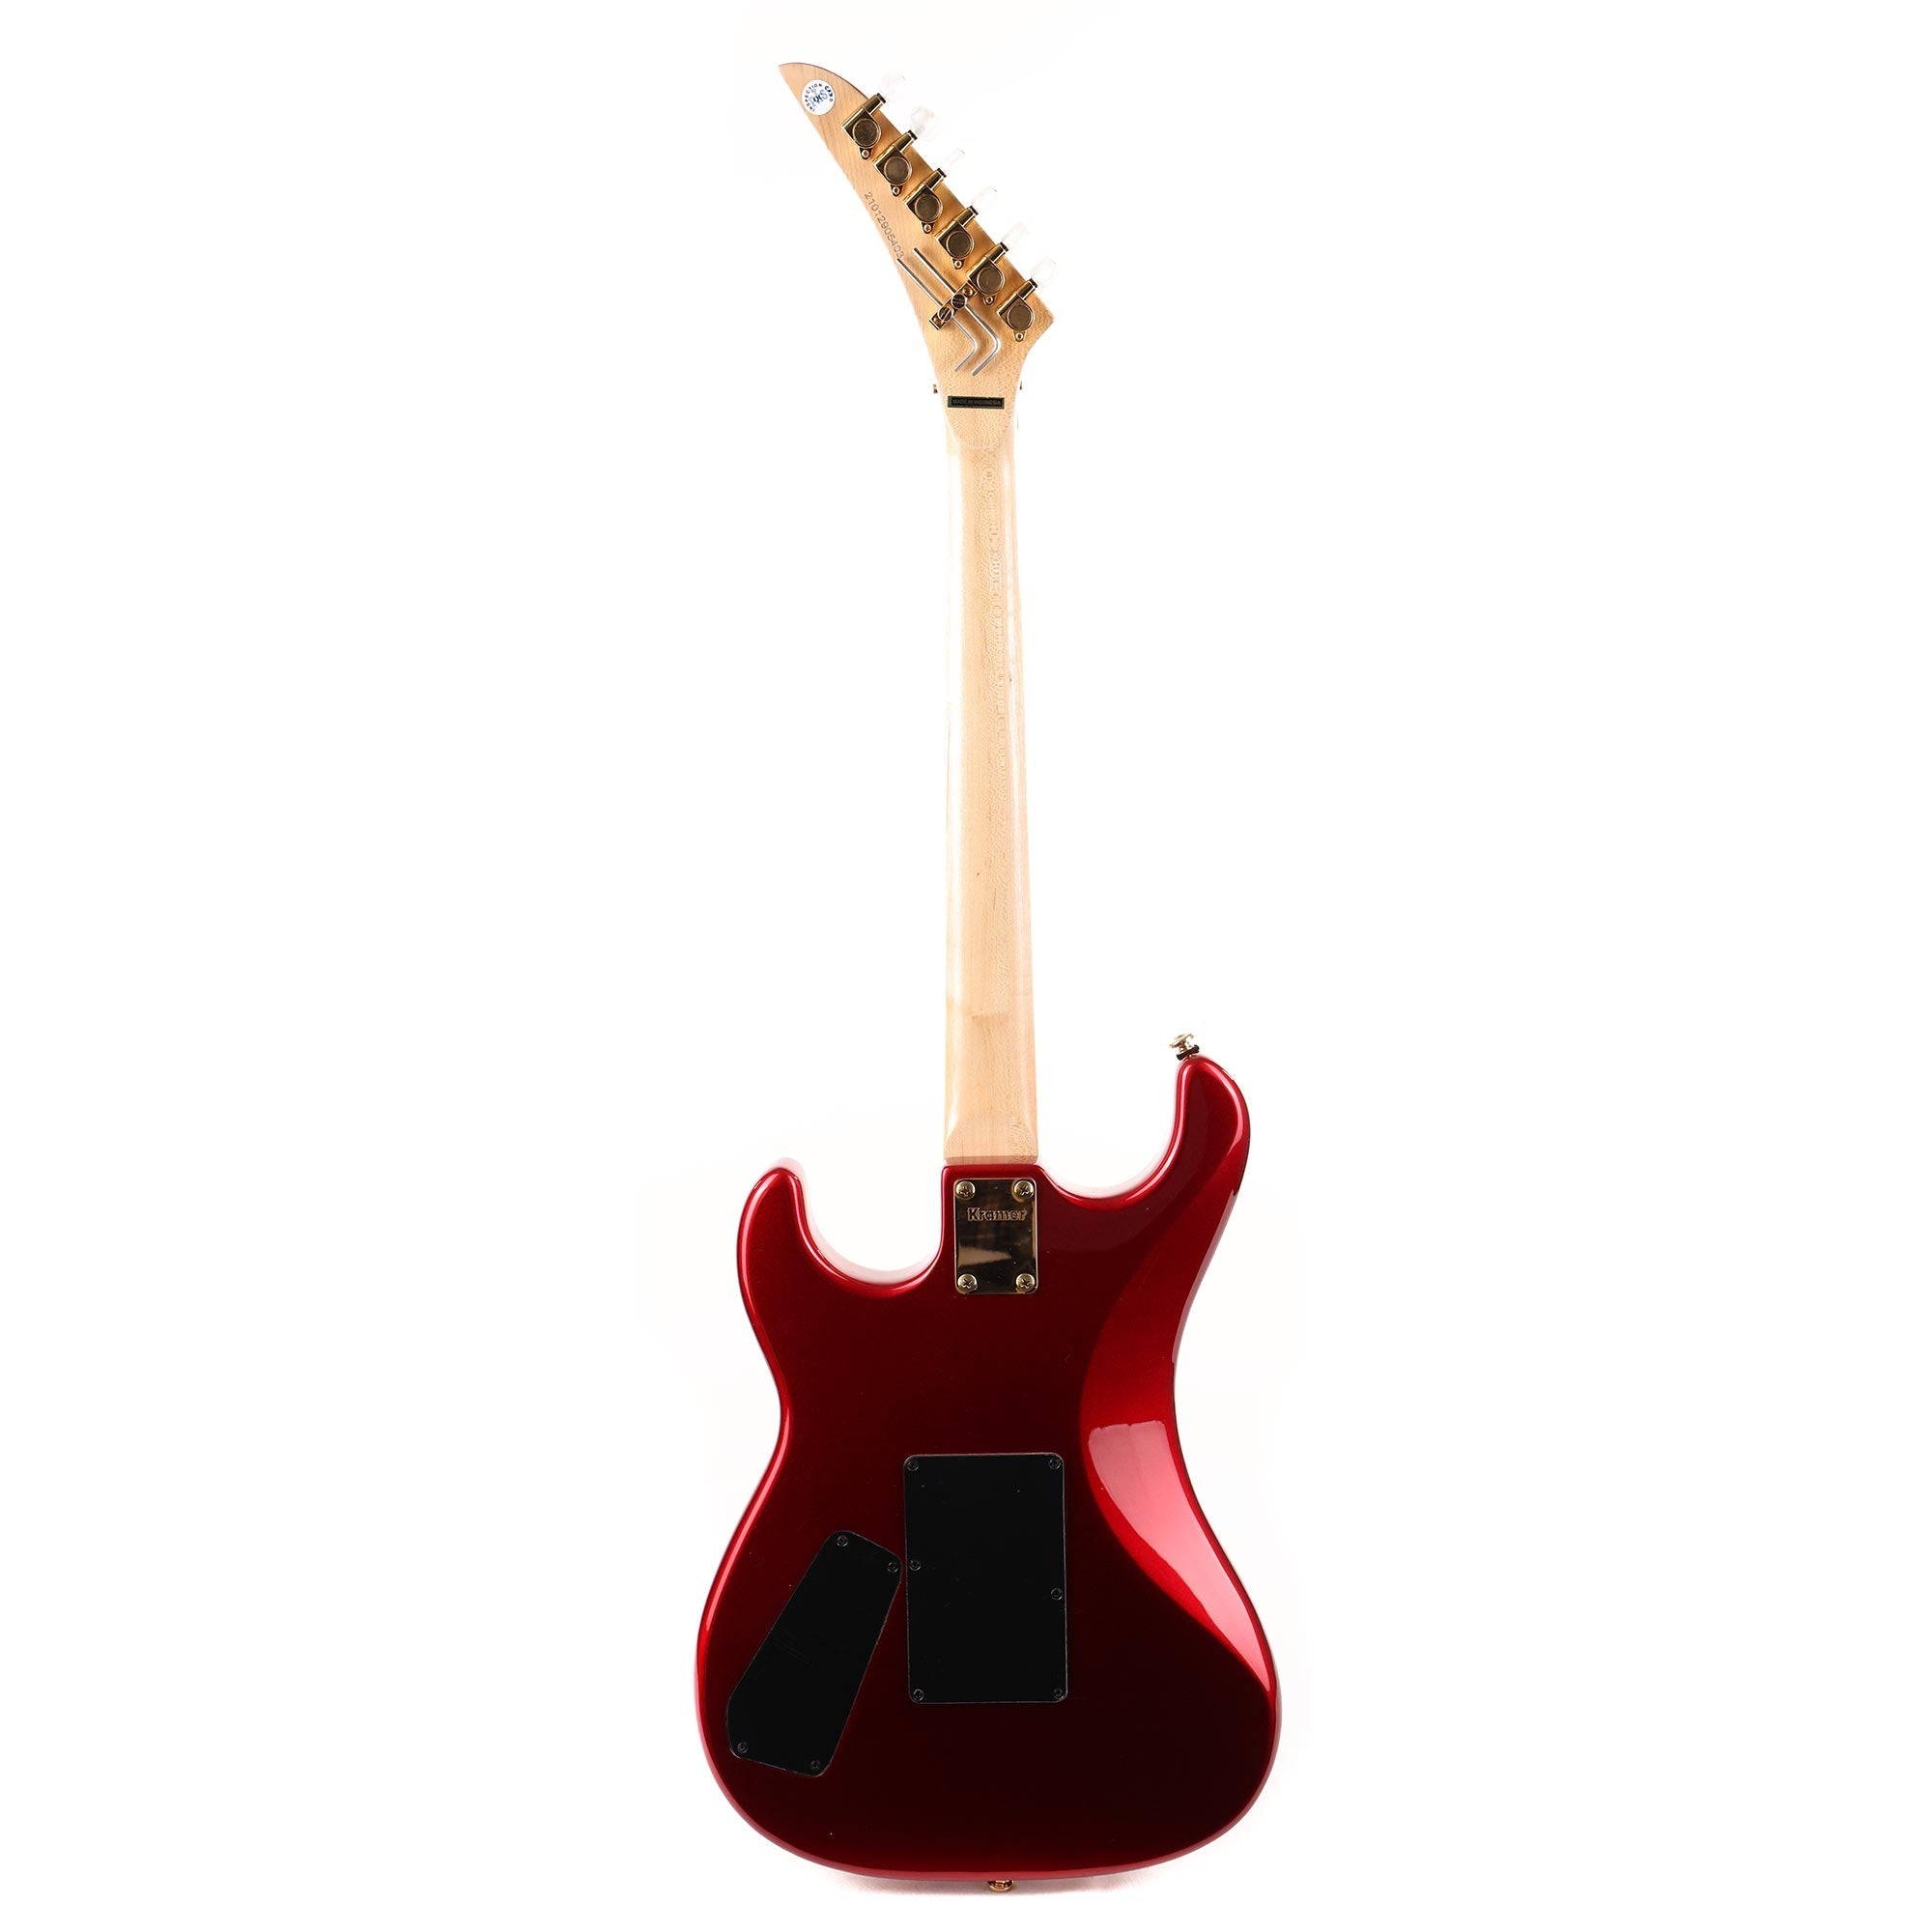 Kramer Jersey Star Reissue Candy Apple Red | The Music Zoo